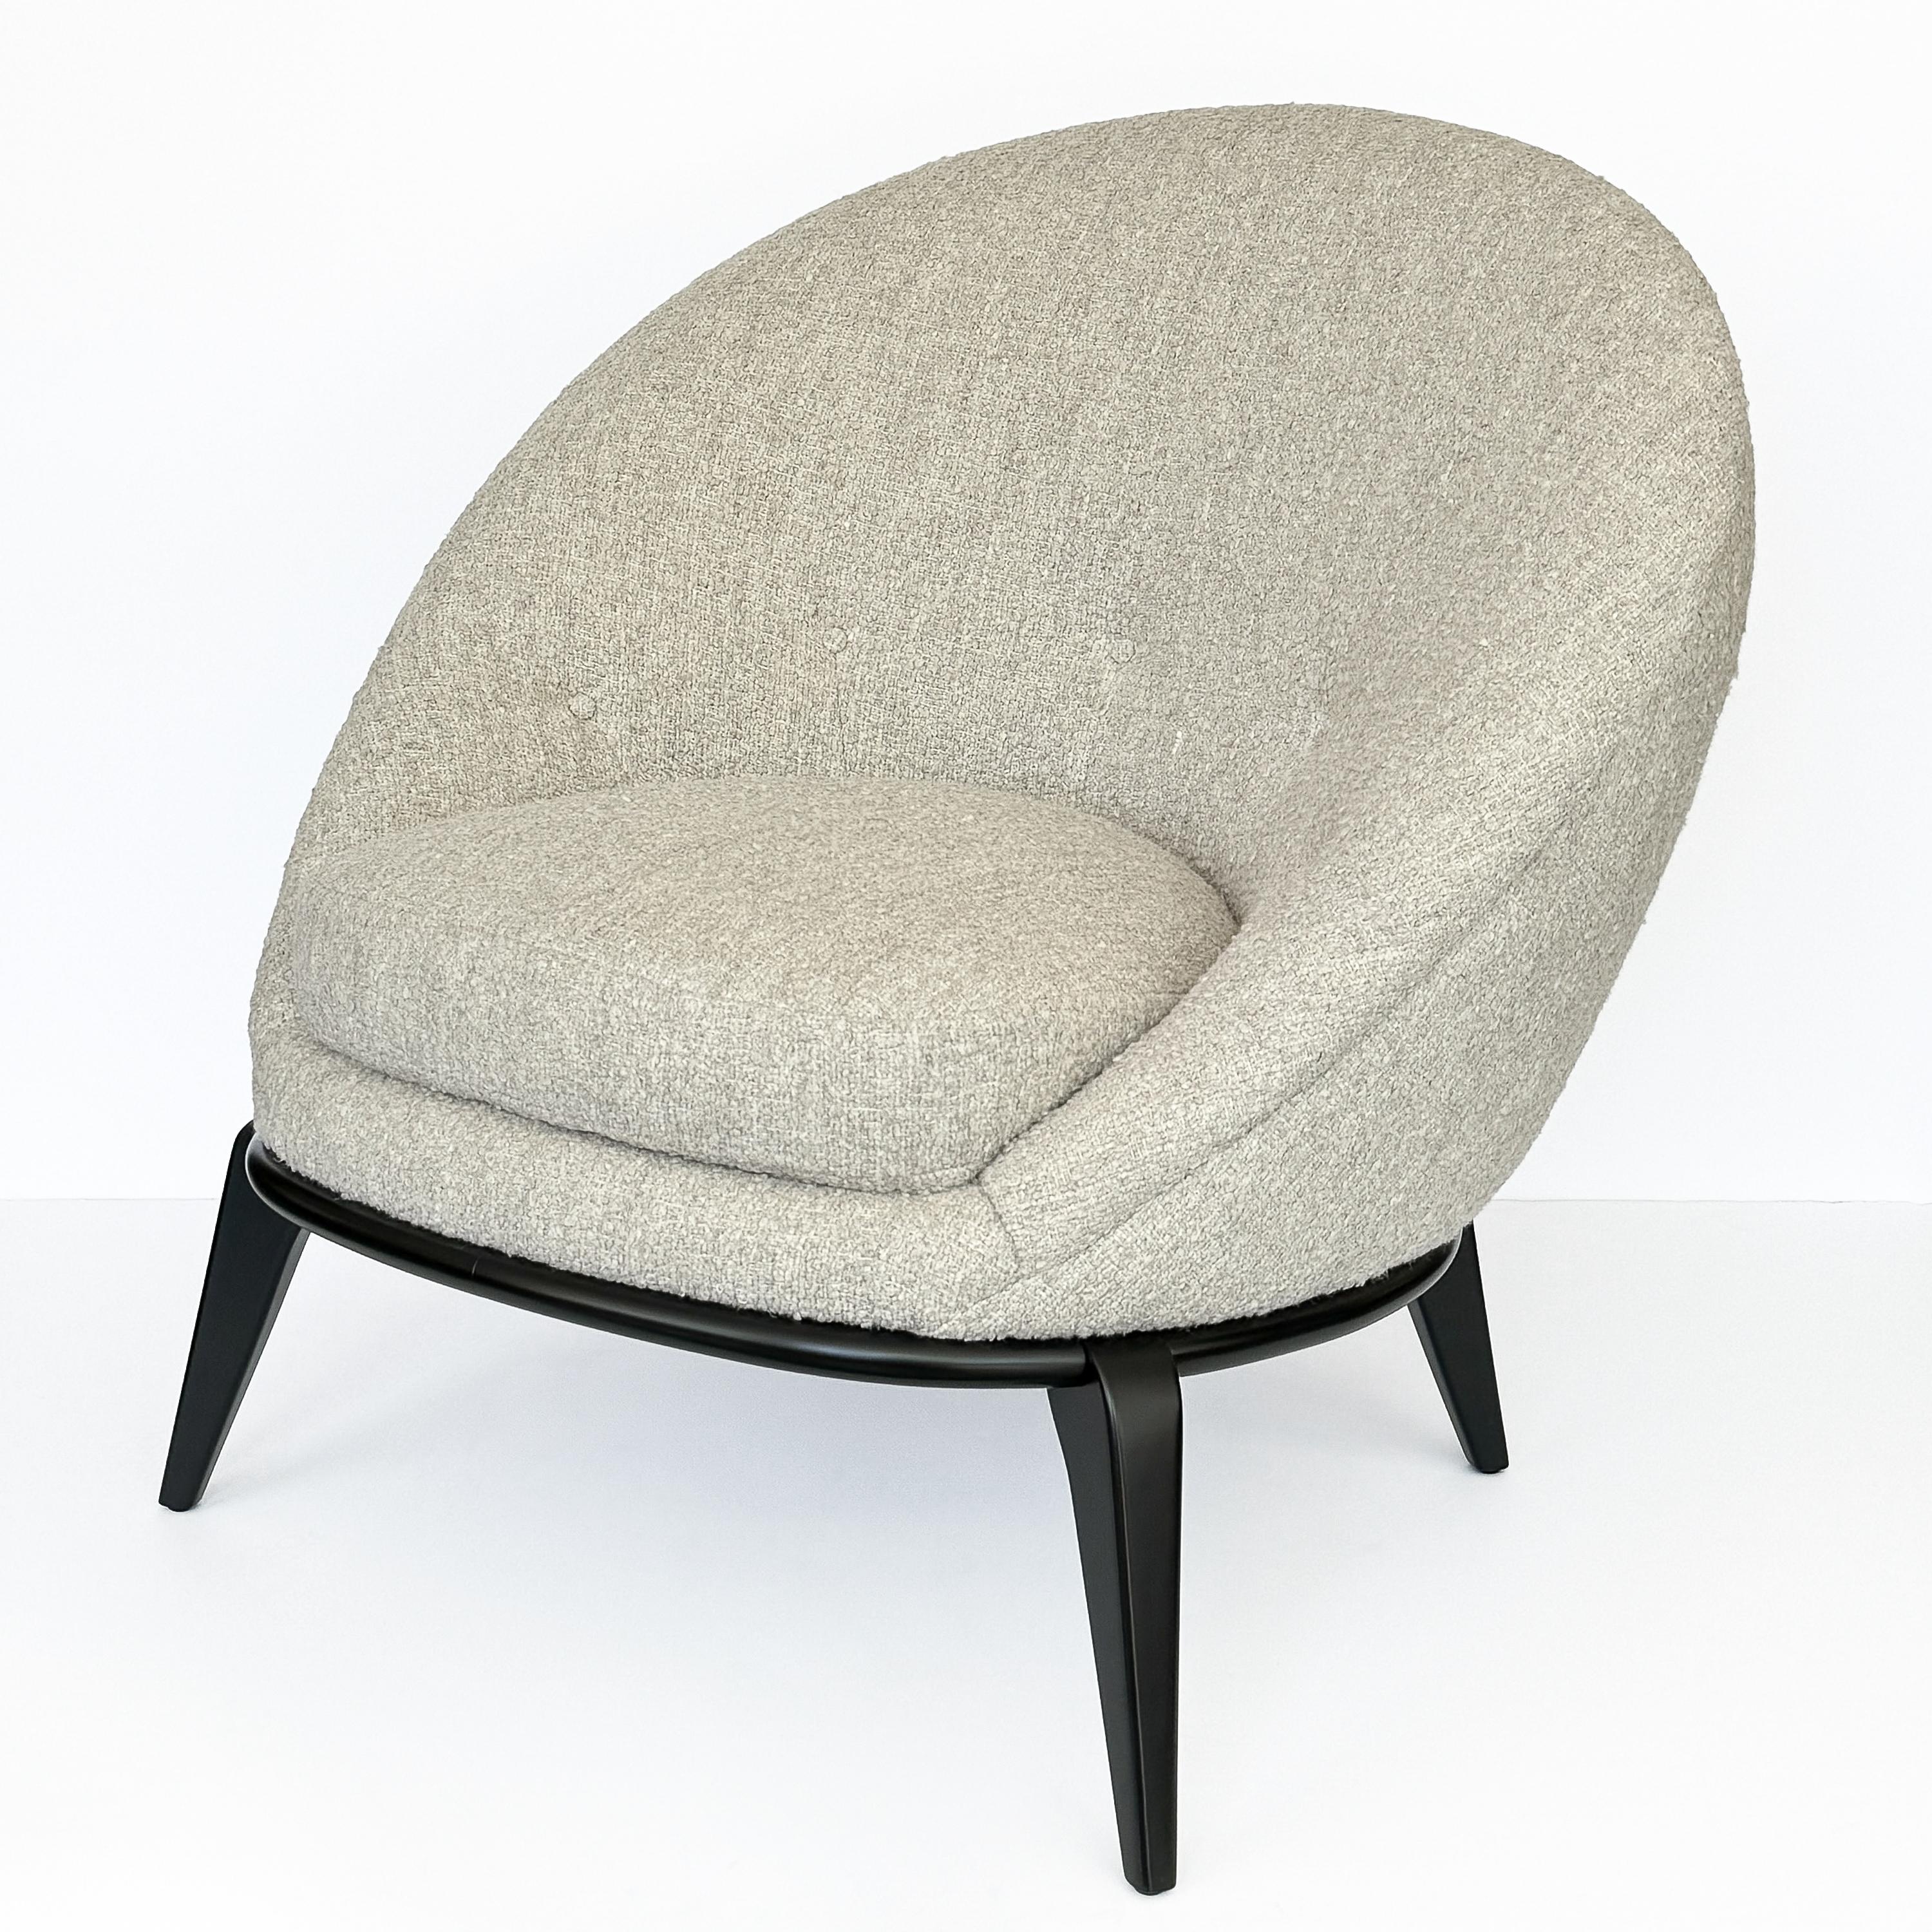 Elevate your living space with this exquisitely restored egg lounge chair, drawing inspiration from the iconic designs of Jean Royère, circa 1960s.

The chair features a unique egg-shaped, spoon-back design that provides supportive and cradles you